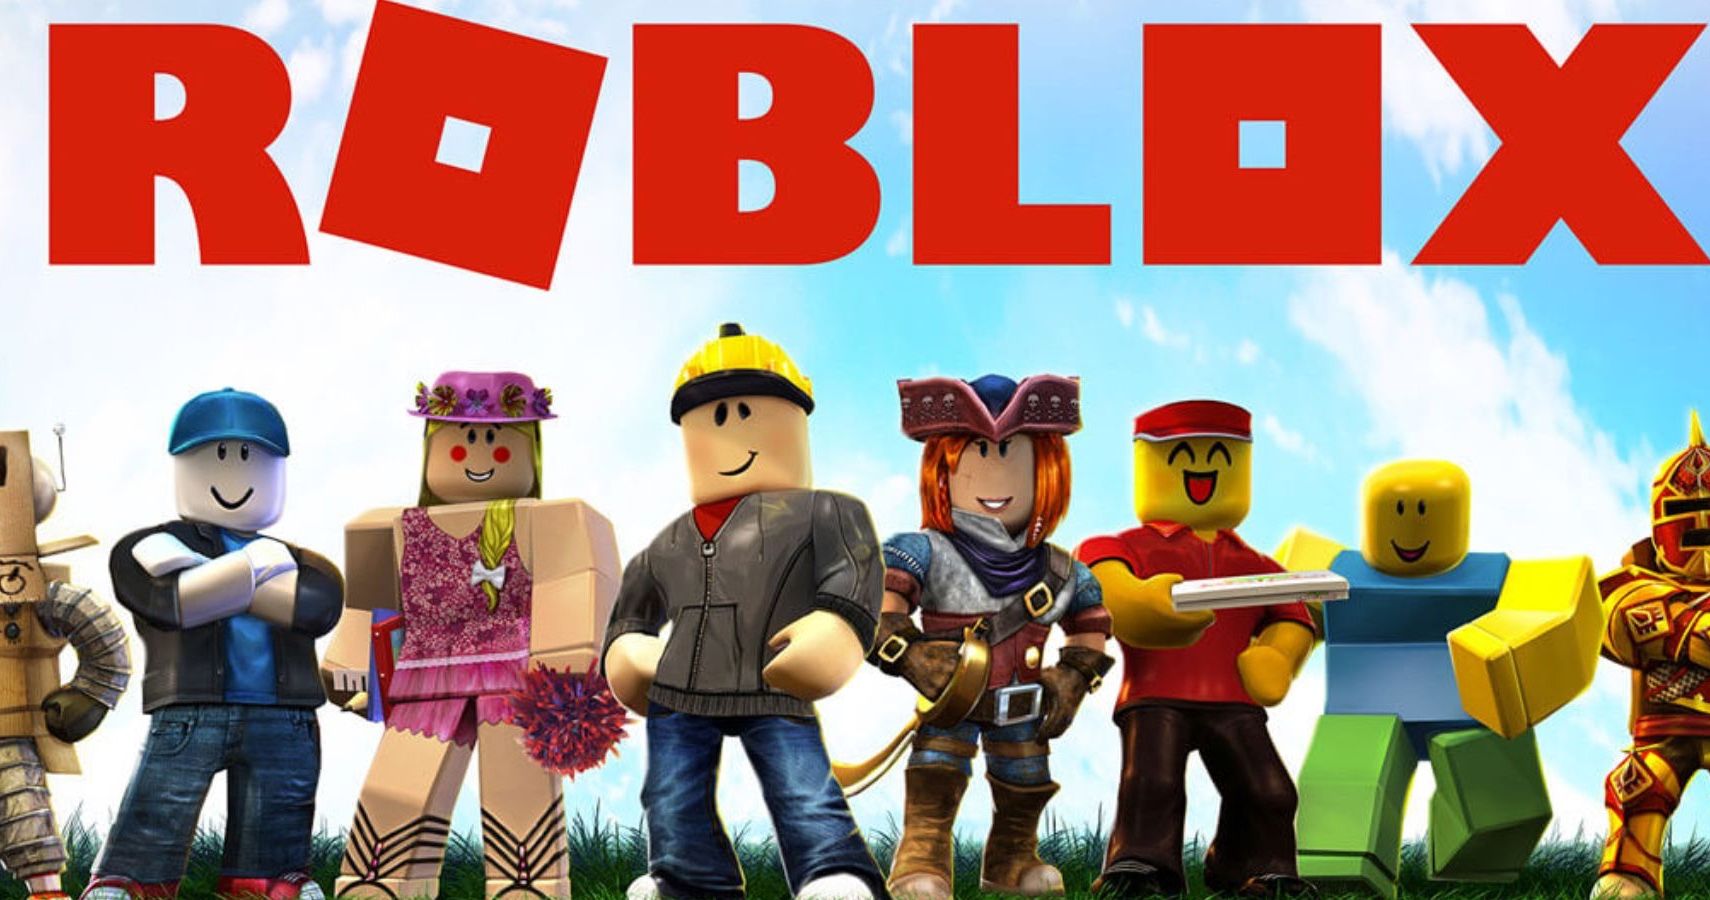 Roblox game-makers must pay to die with an 'oof